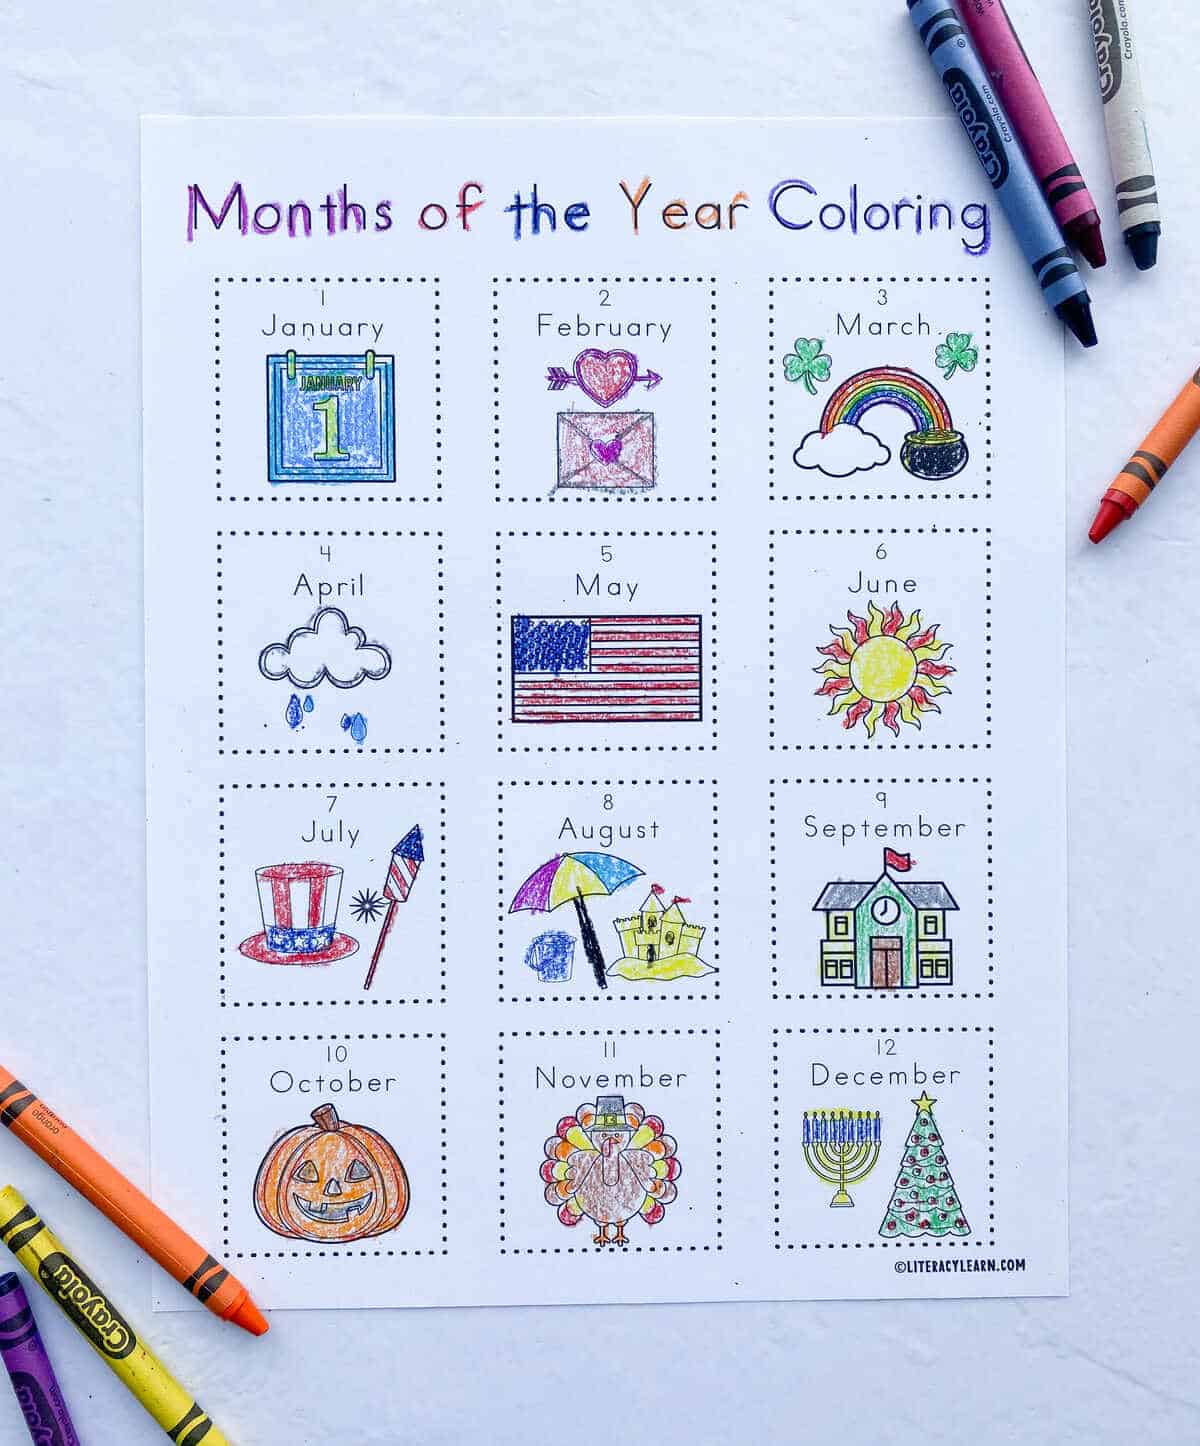 The months of the year coloring worksheet with crayons. 